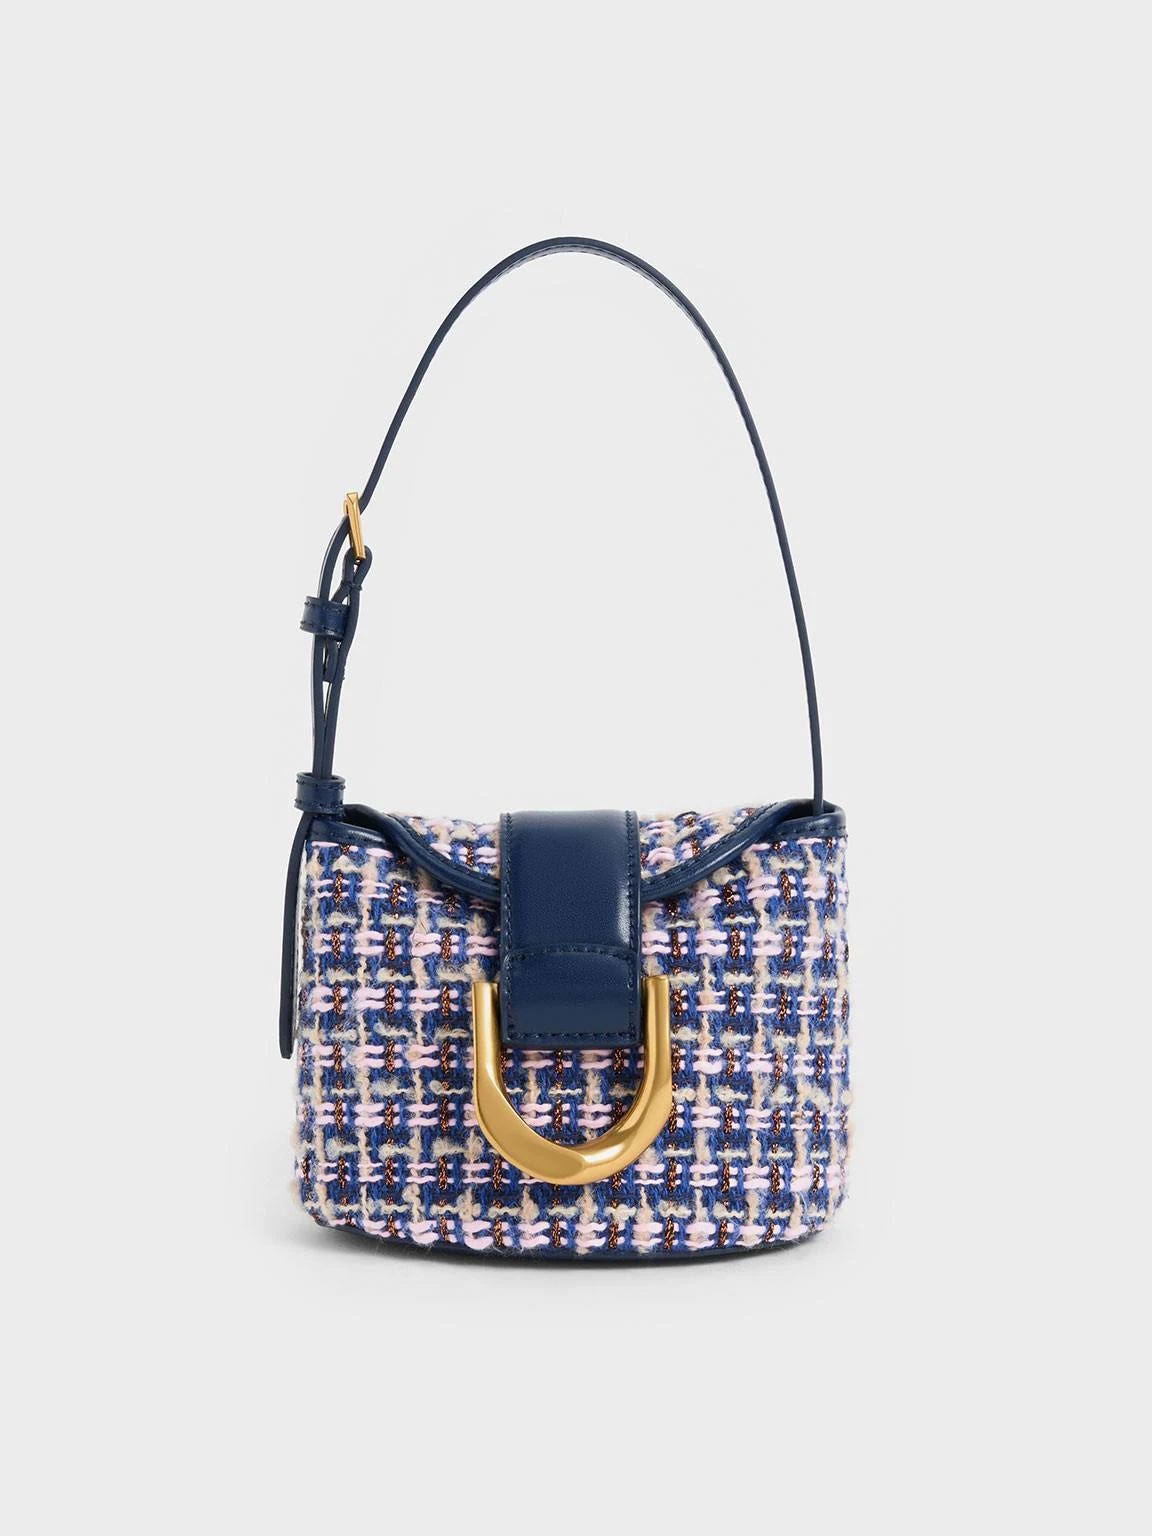 Luxurious Navy Blue Bucket Bag by Charles & Keith | Image